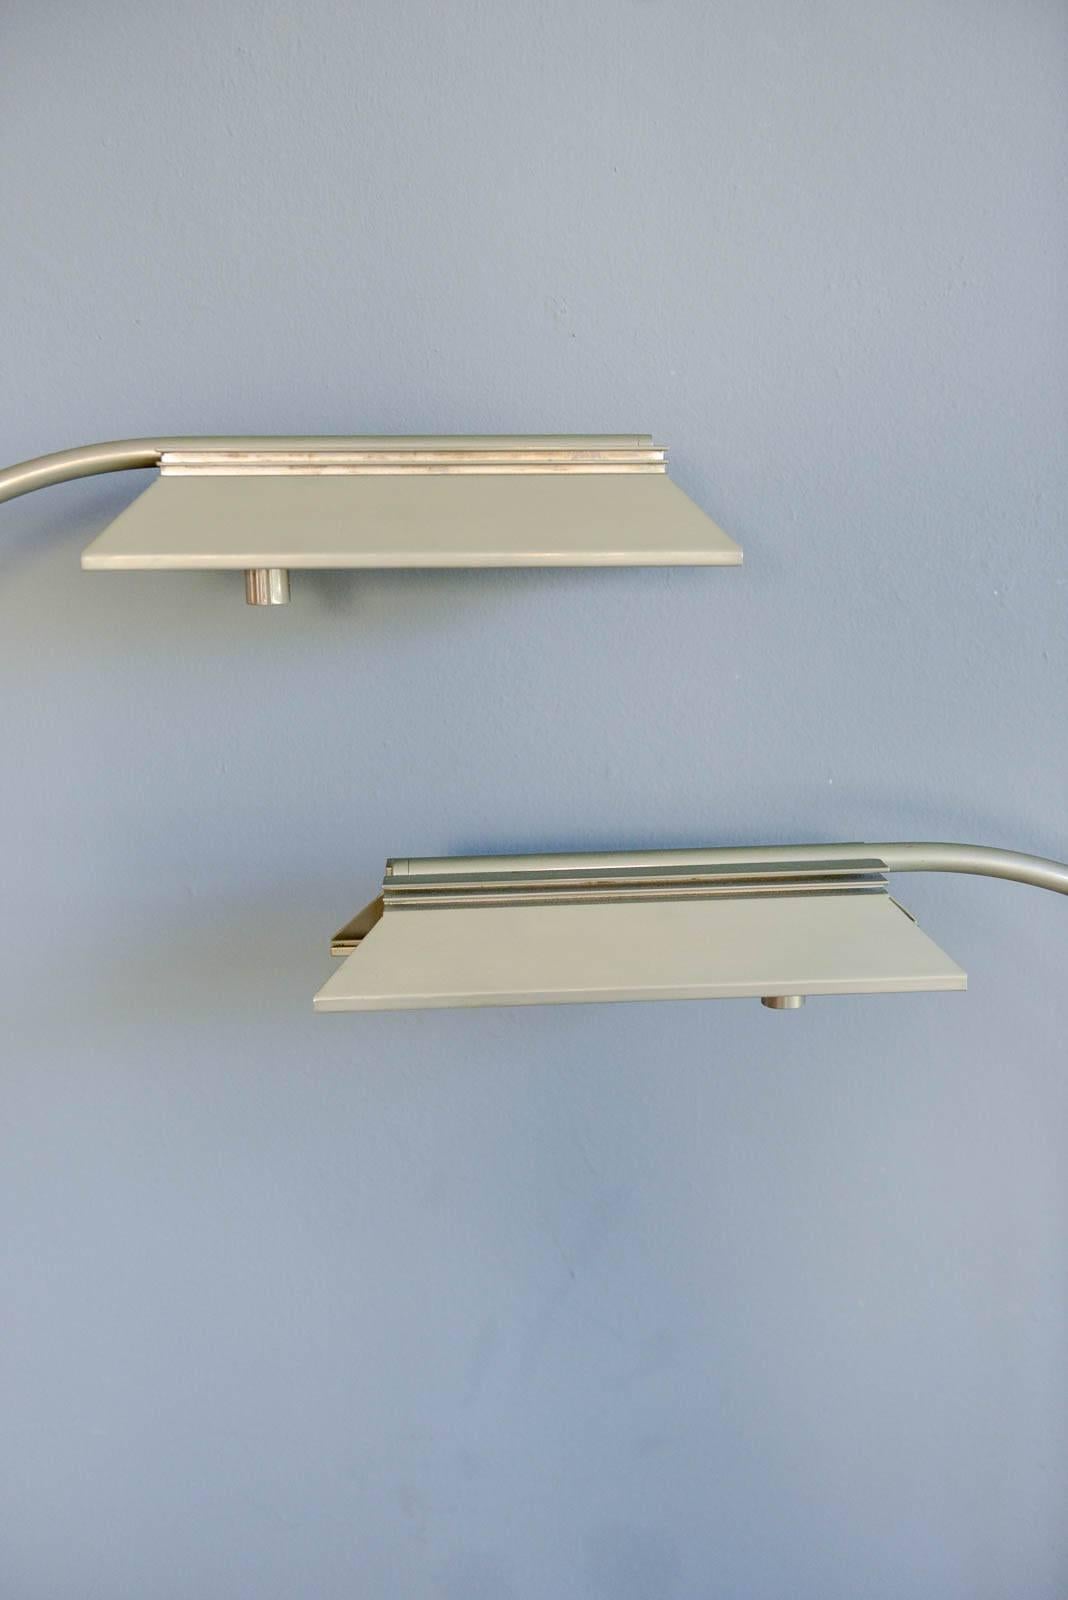 Late 20th Century Pair of Brushed Nickel Adjustable Dimmable Floor Lamps by Casella, circa 1970